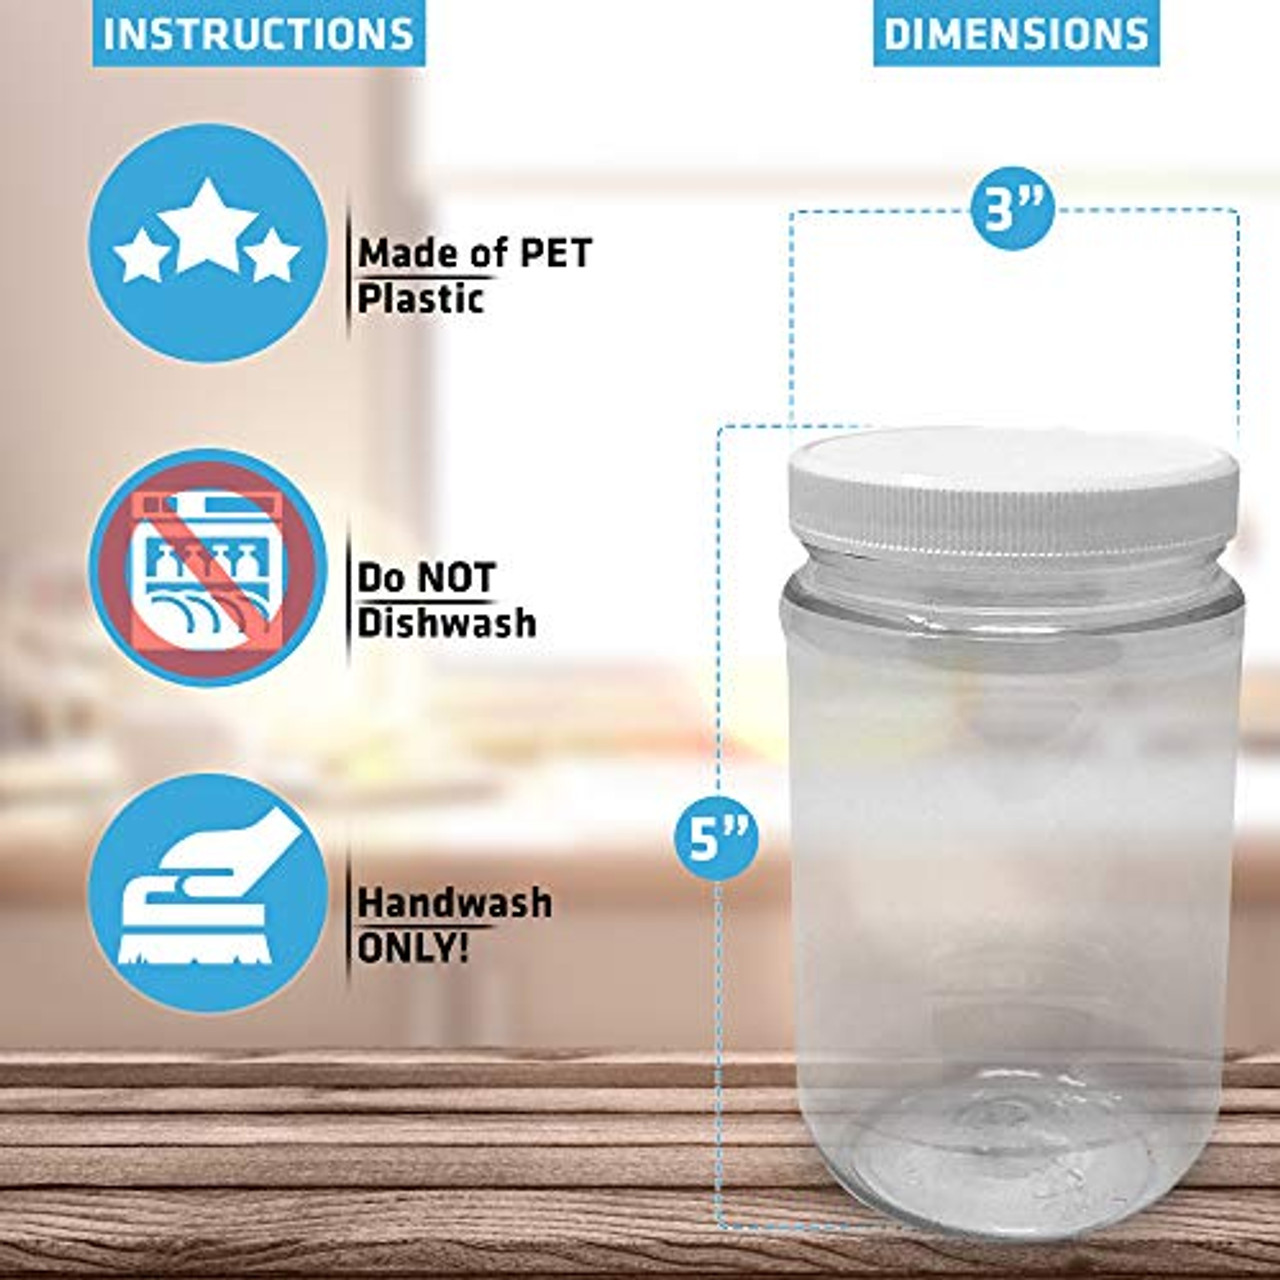 16 Oz Clear Plastic Mason Jars With Ribbed Liner Screw On Lids, Wide Mouth,  ECO, BPA